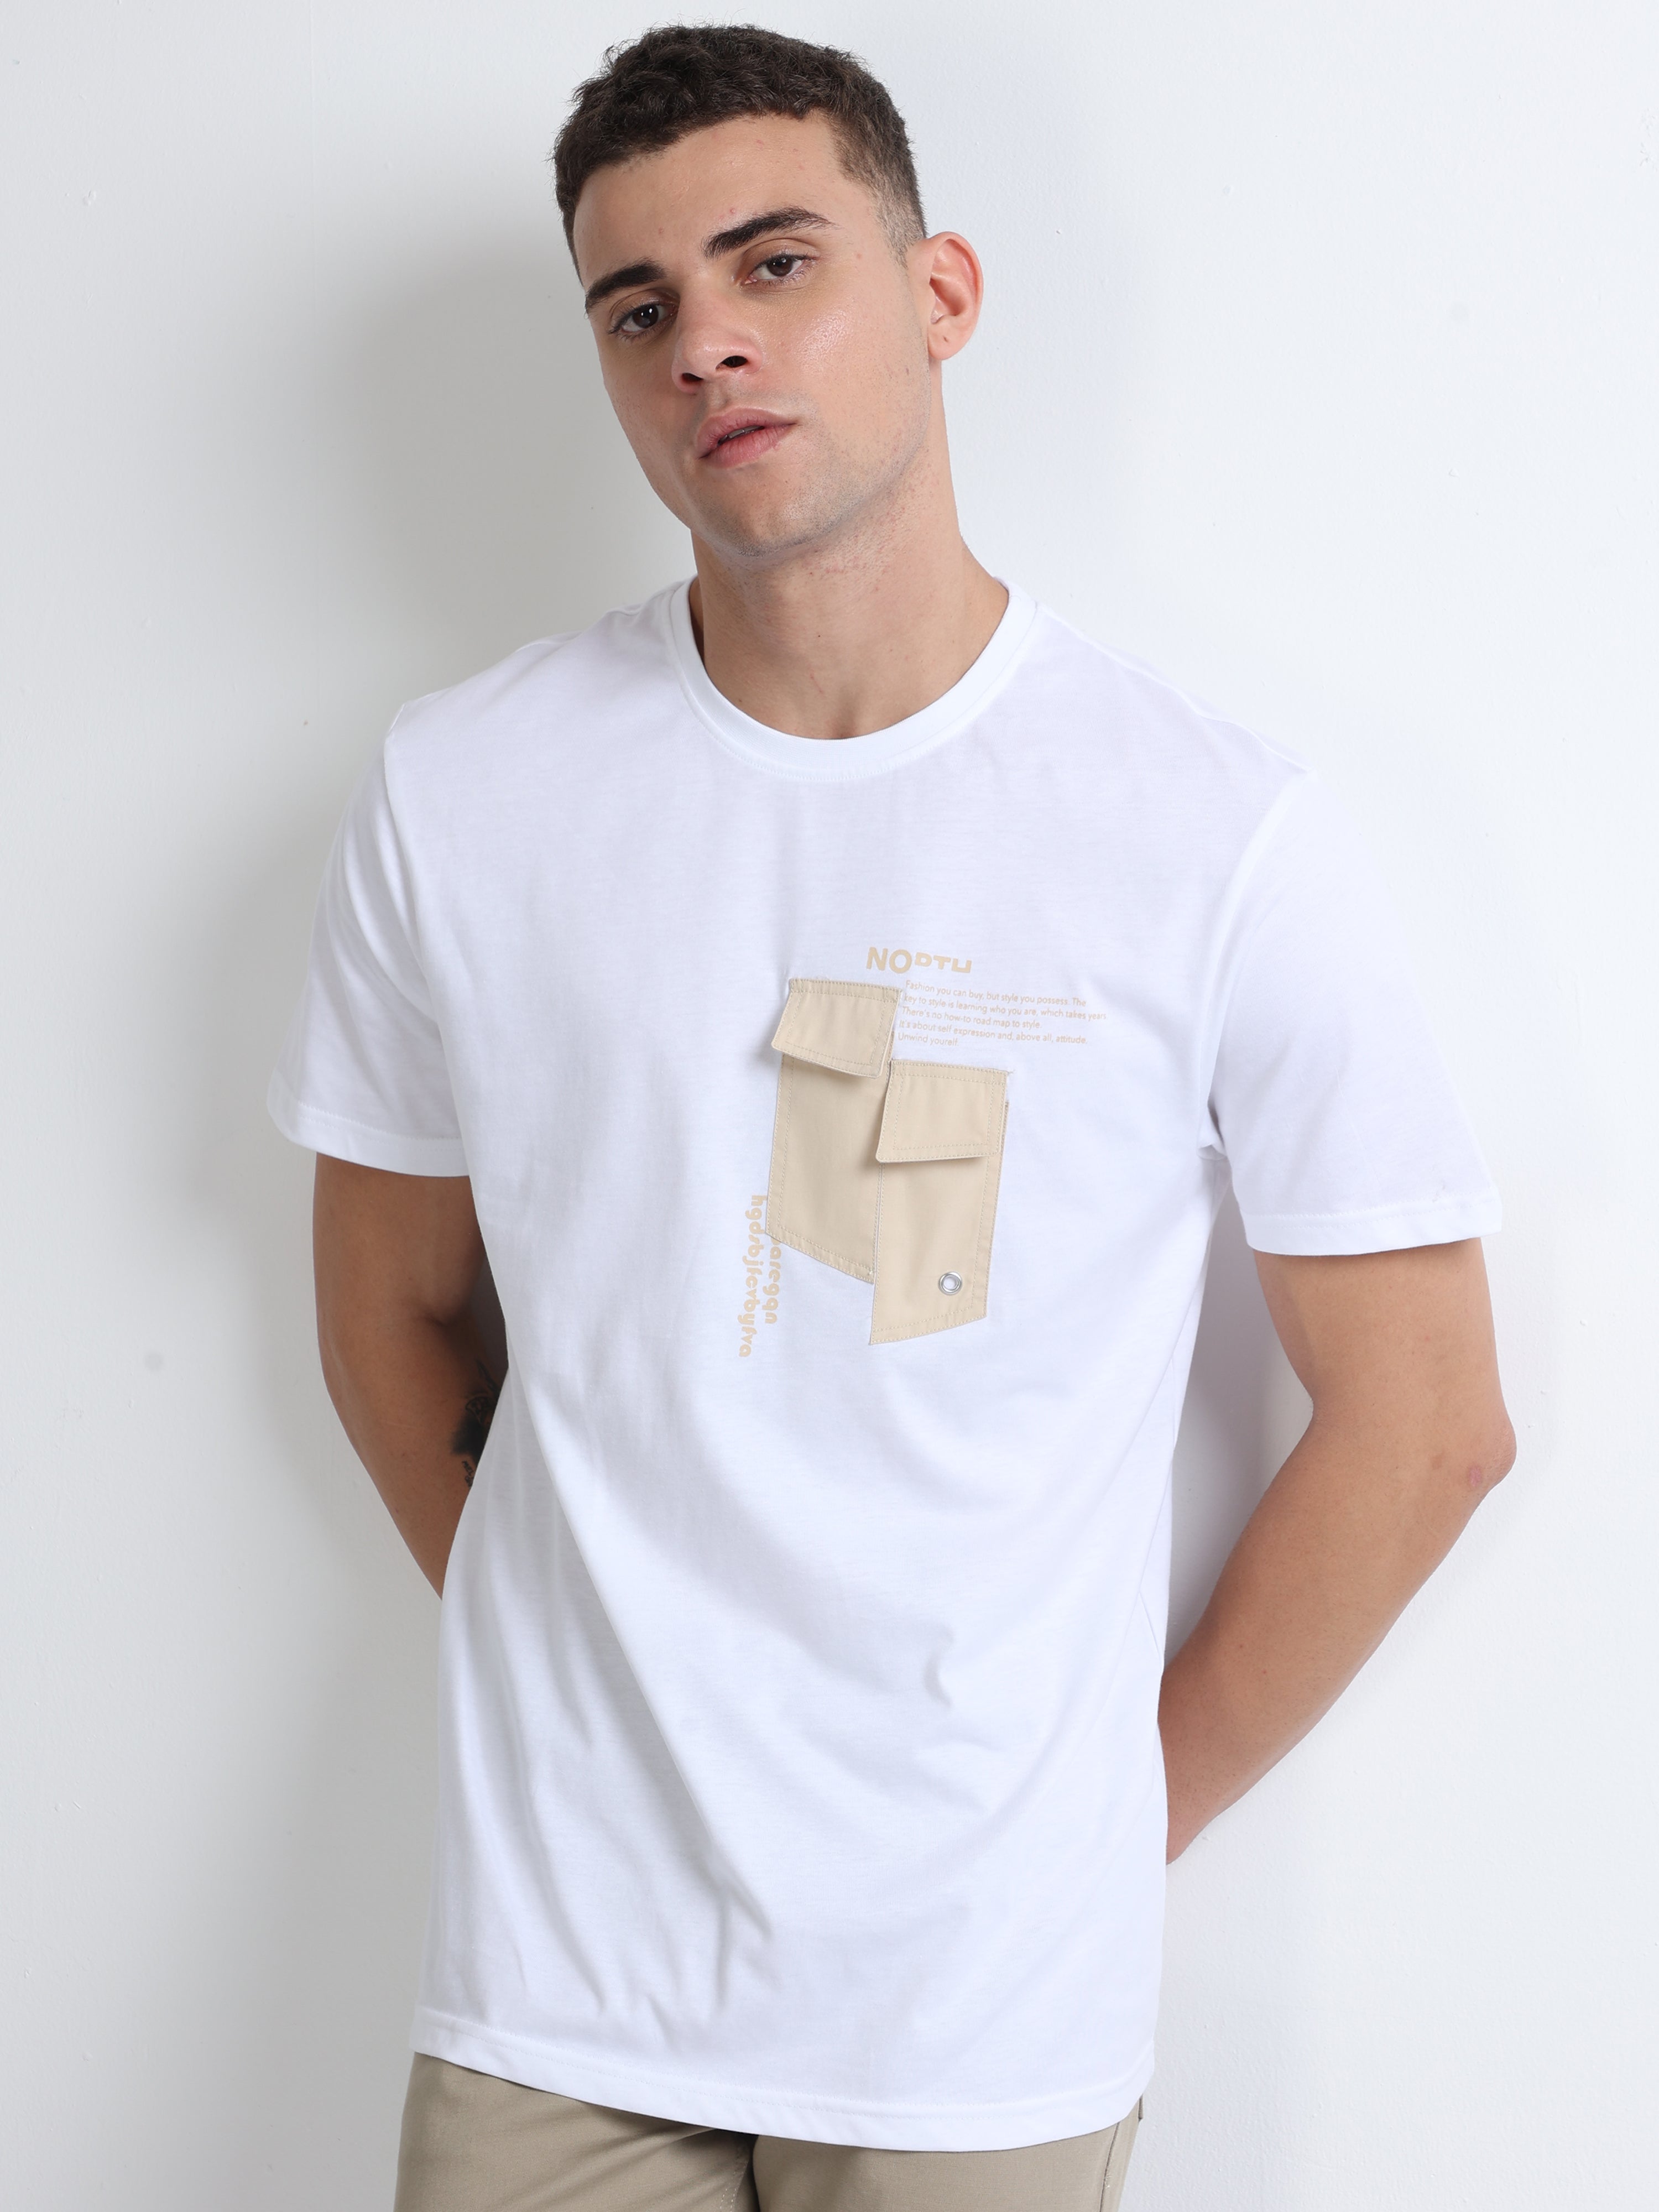 Graphic　White　T-Shirt　Printed　Pocket　Online　Buy　Neck　Crew　With